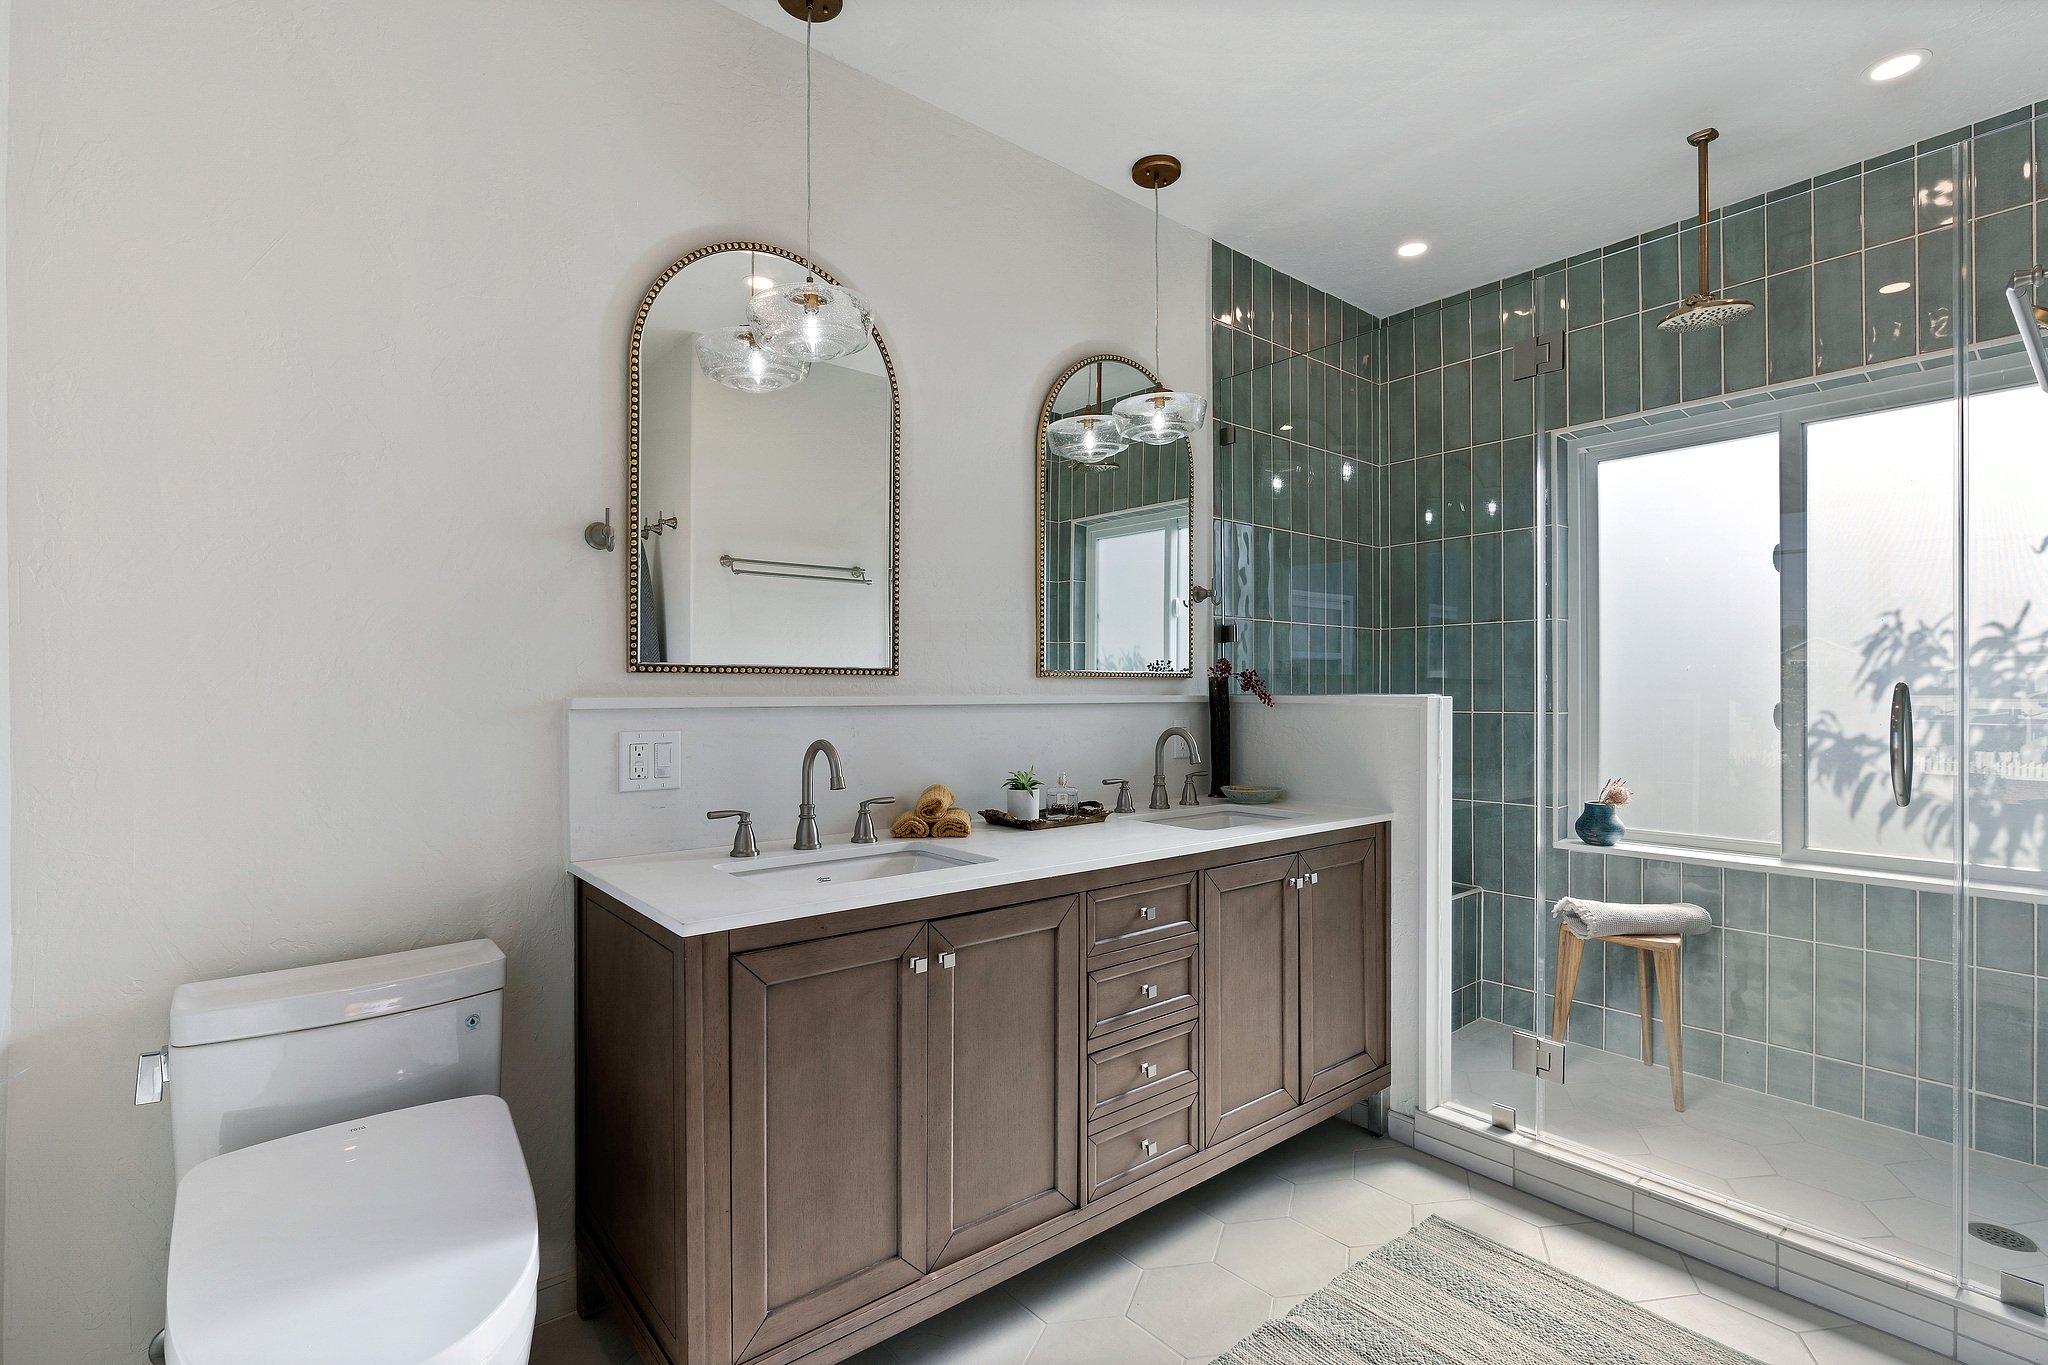 Alma Project: Bathroom Remodel, Centsational Style